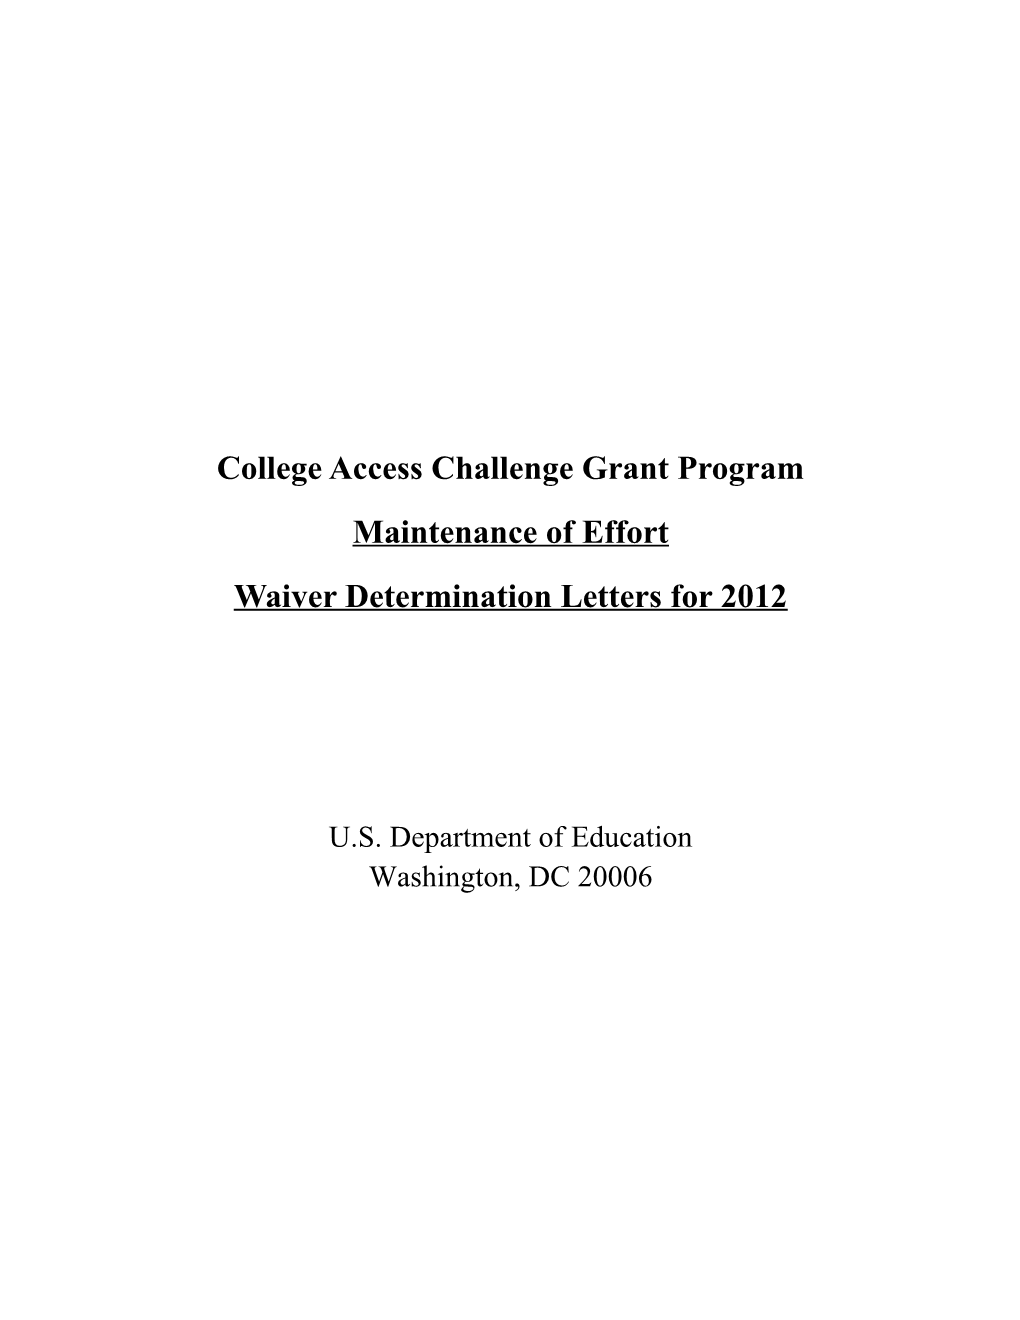 Maintenance of Effort Waiver of Determination Letters for 2012 Under the College Access